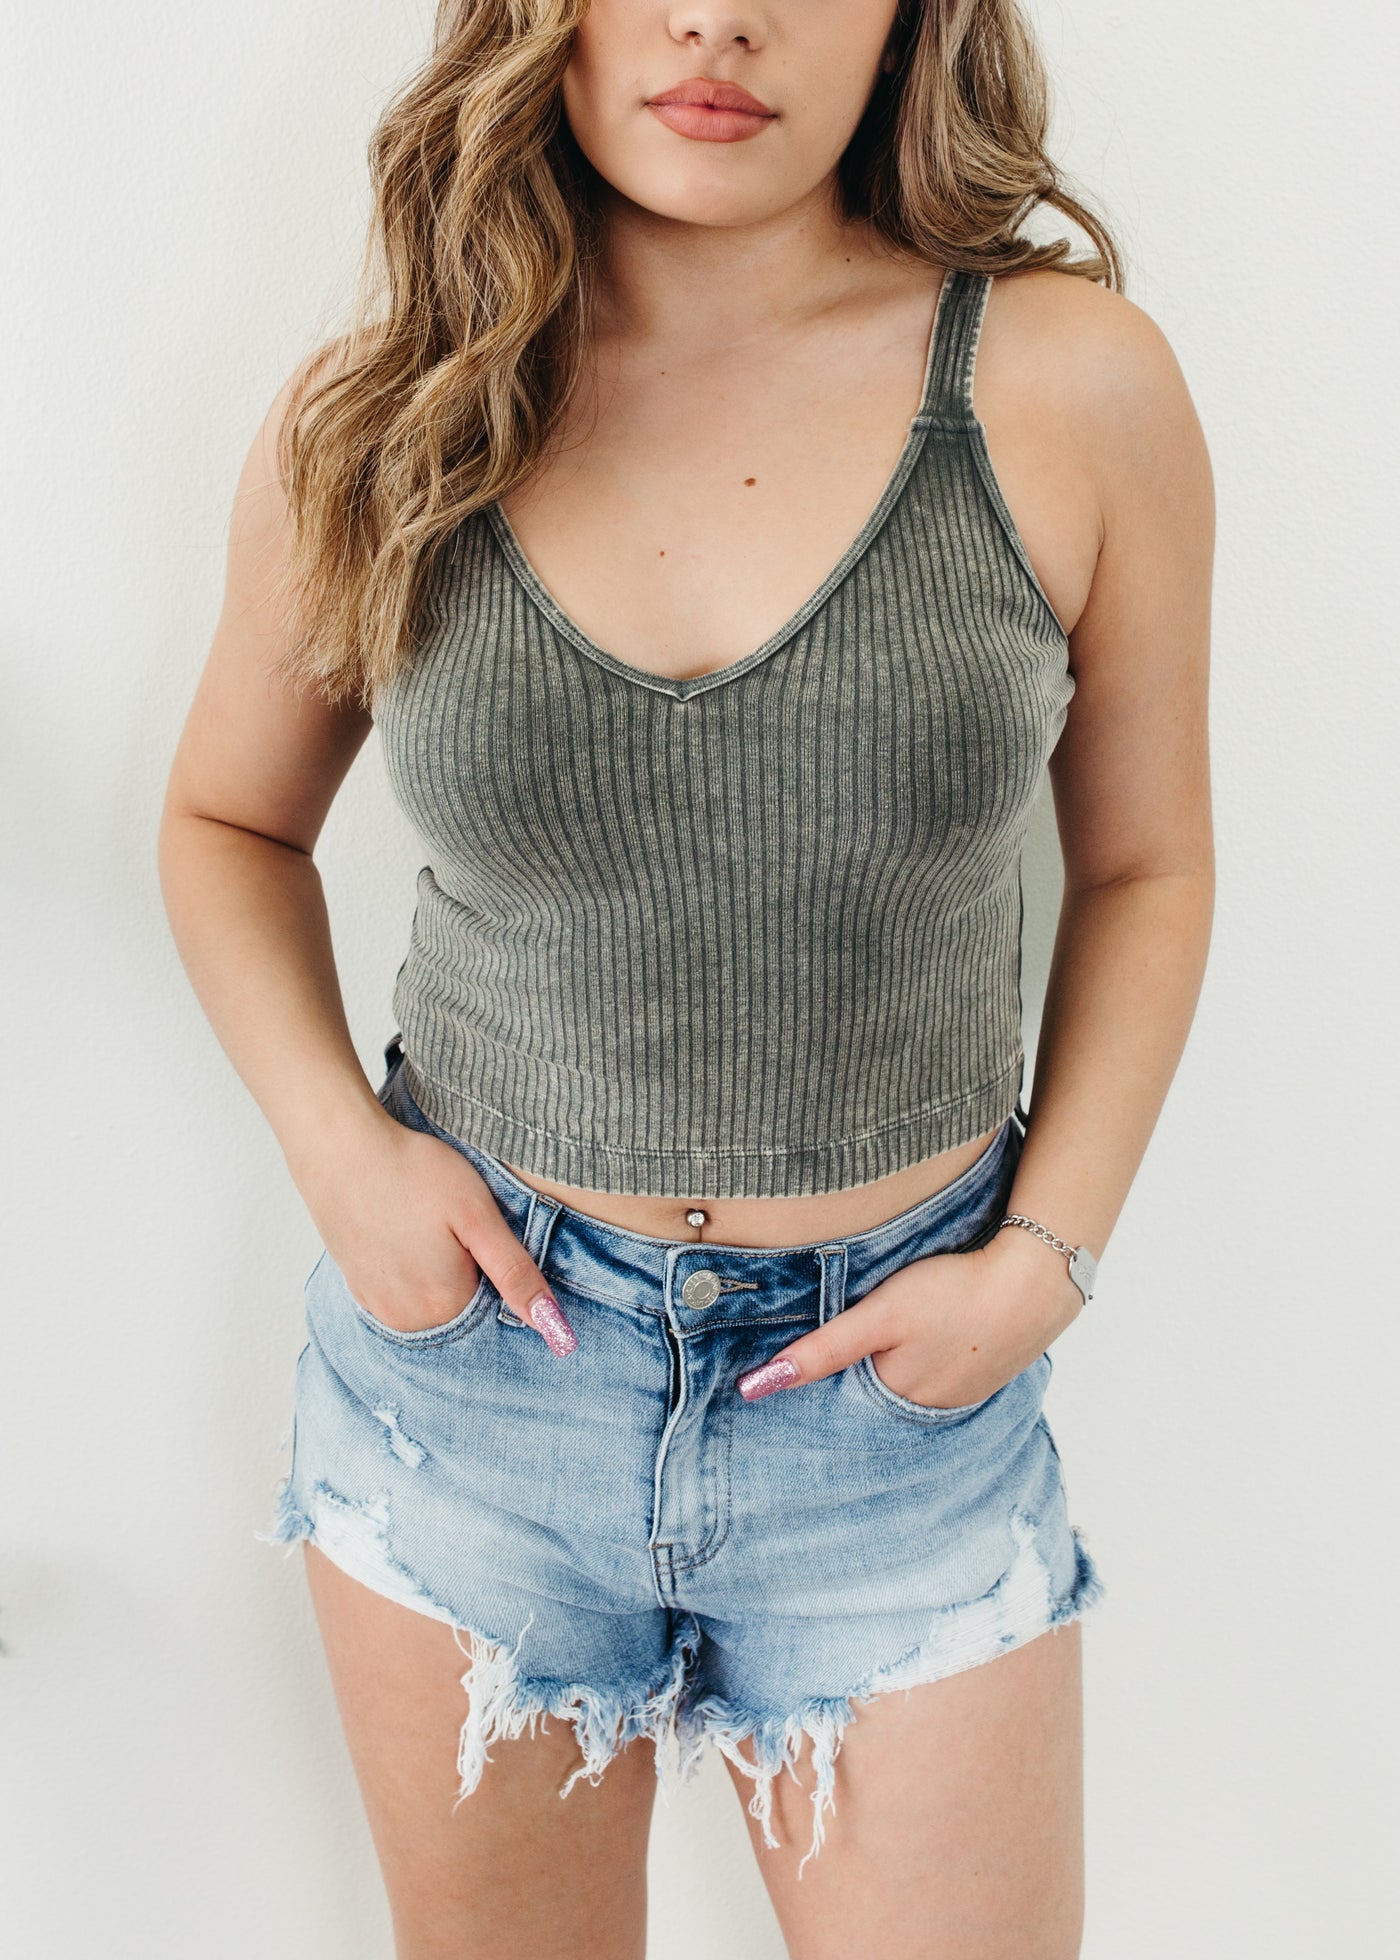 The Party's Here - High Waisted Distressed Shorties